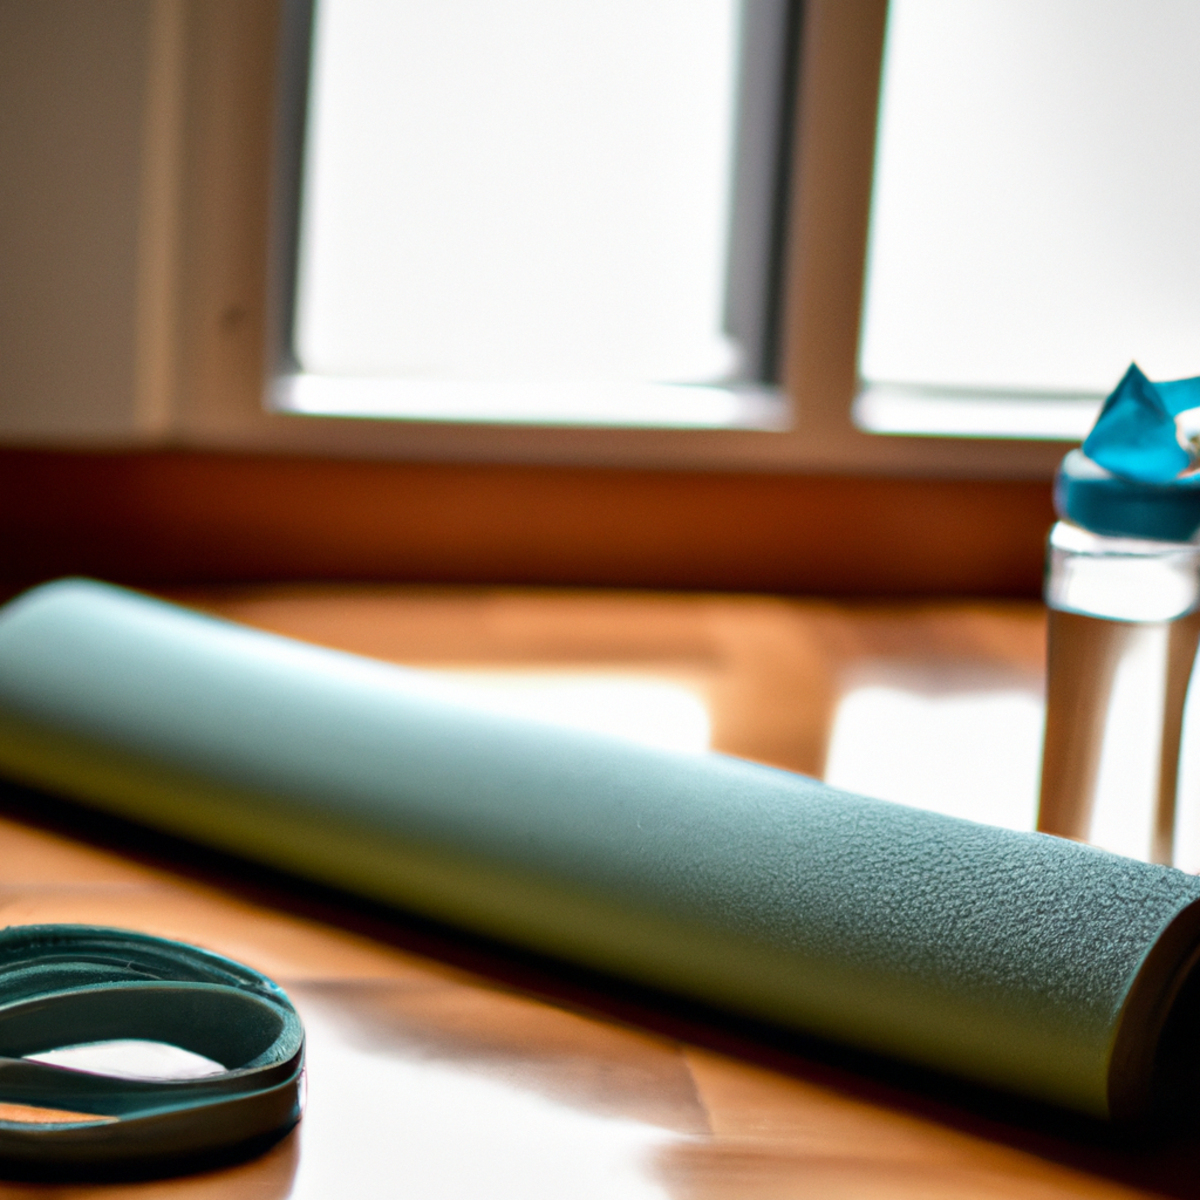 The photo shows a yoga mat on the floor with a water bottle, a towel, and a resistance band placed neatly beside it. In the background, a wooden floor and a window with natural light streaming in can be seen. The focus of the photo is on the objects, emphasizing the importance of incorporating bodyweight exercises into a yoga routine. The composition of the photo is simple yet effective, conveying a sense of calm and balance.